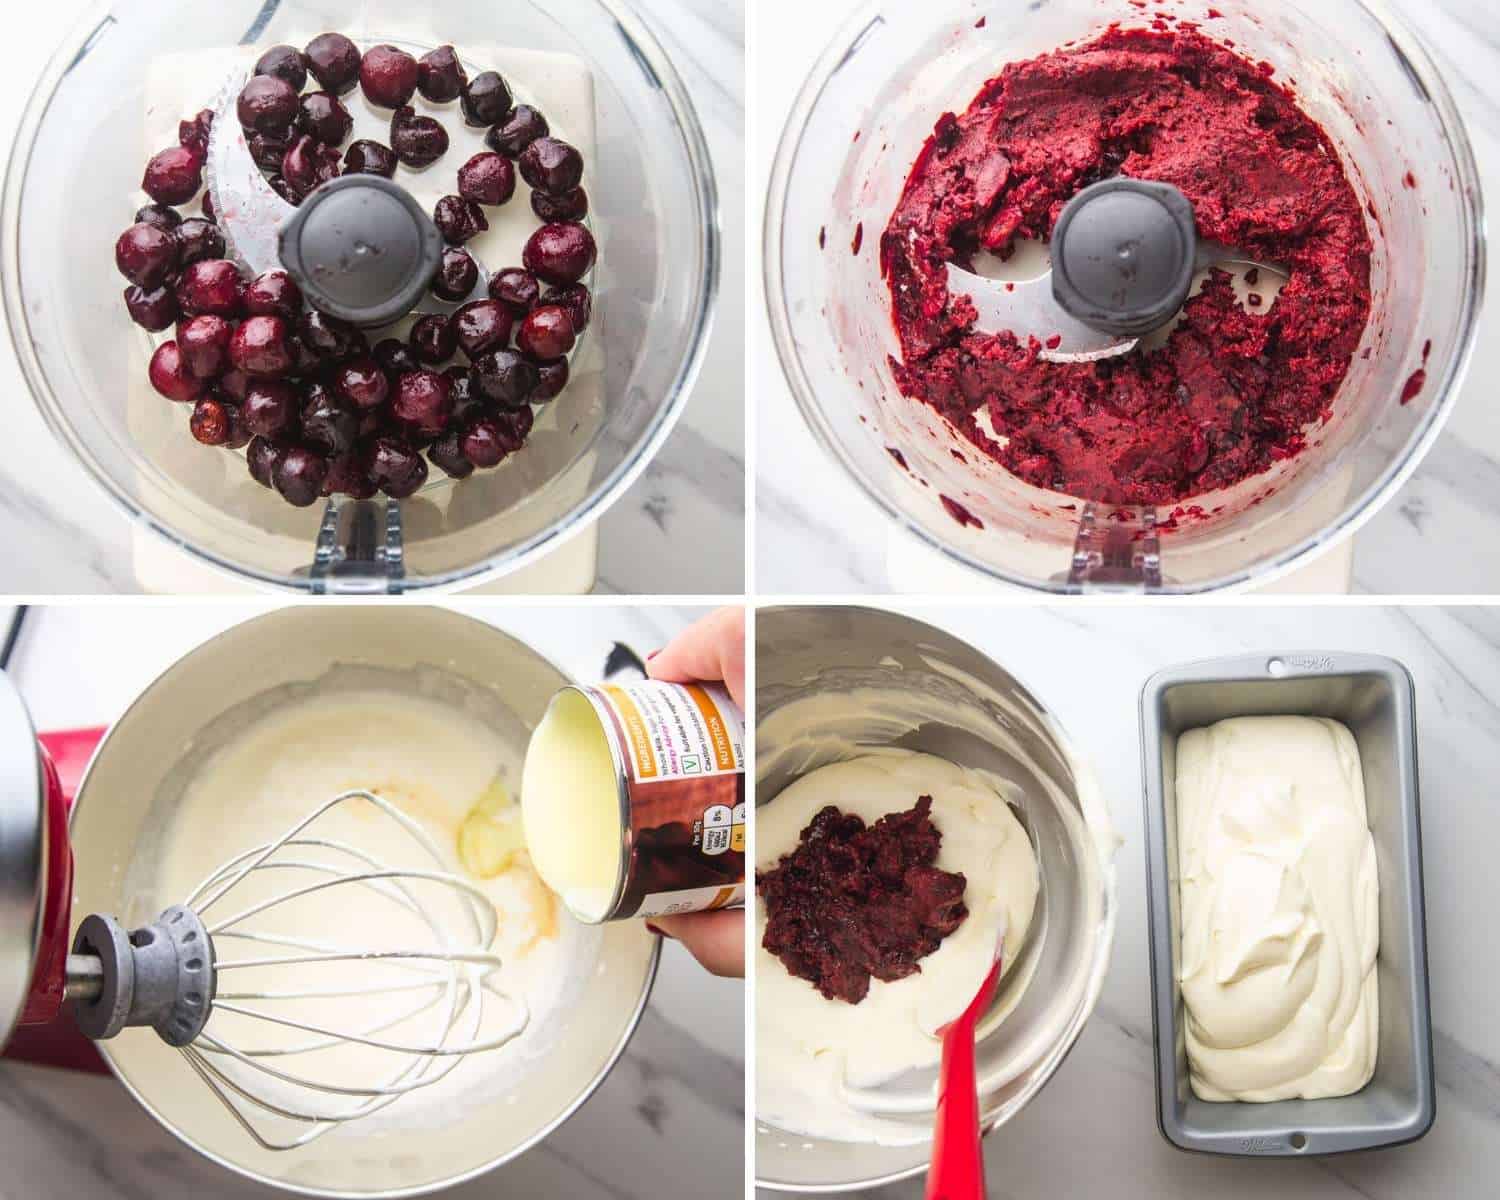 Collage of four images showing how to blend cherries and whip the whipping cream